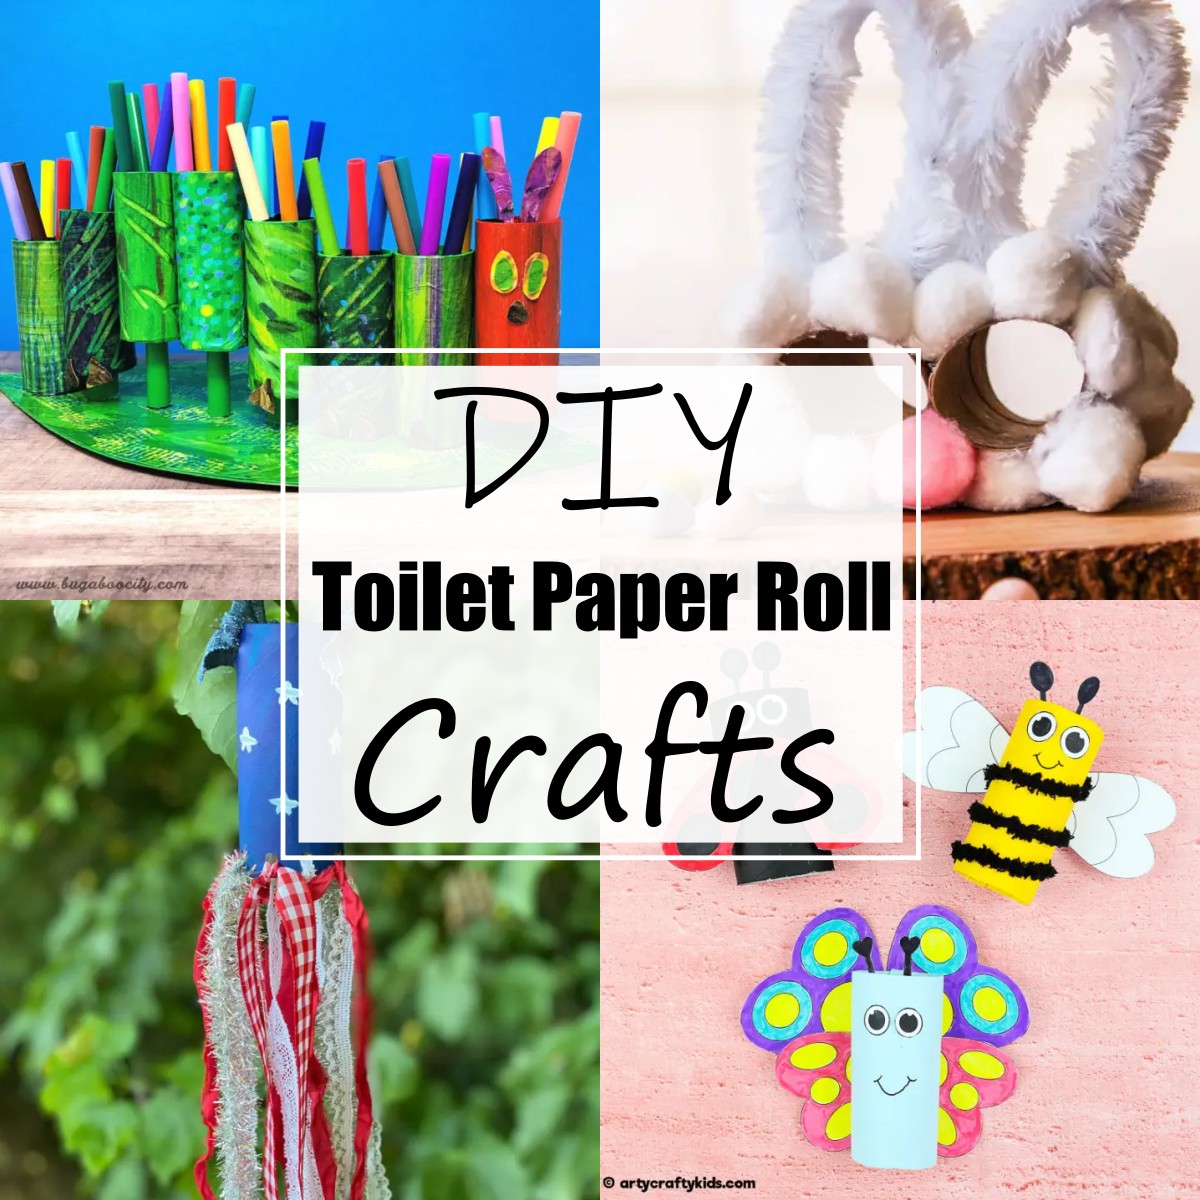 20 Diy Toilet Paper Roll Craft Ideas For Kids - All Sands